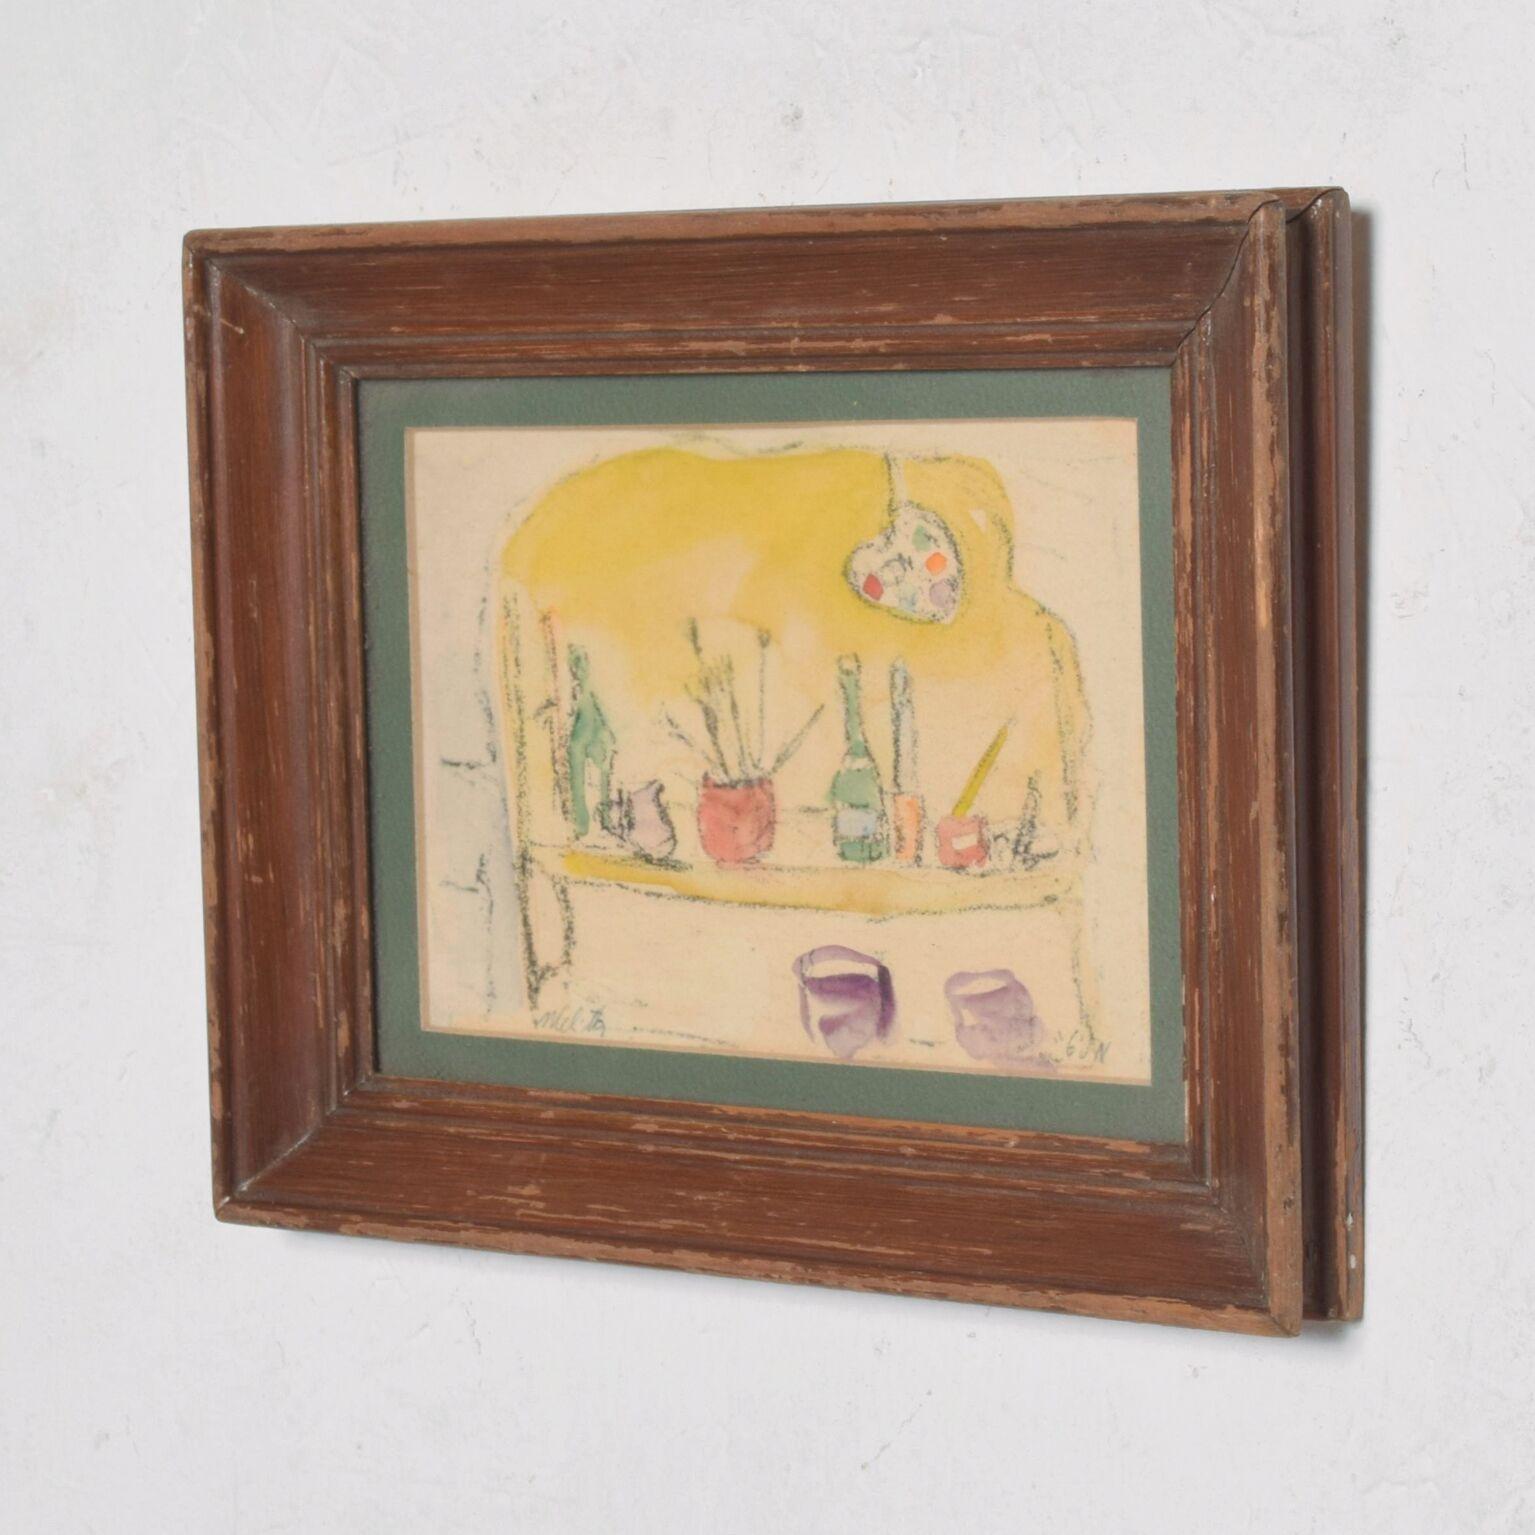 Vintage still life drawing in yellow, green and purple colors signed which appears to be Melita in lower left corner and signed on bottom right corner as well.
It seems to be a lithograph watercolor on paper.
 10.75